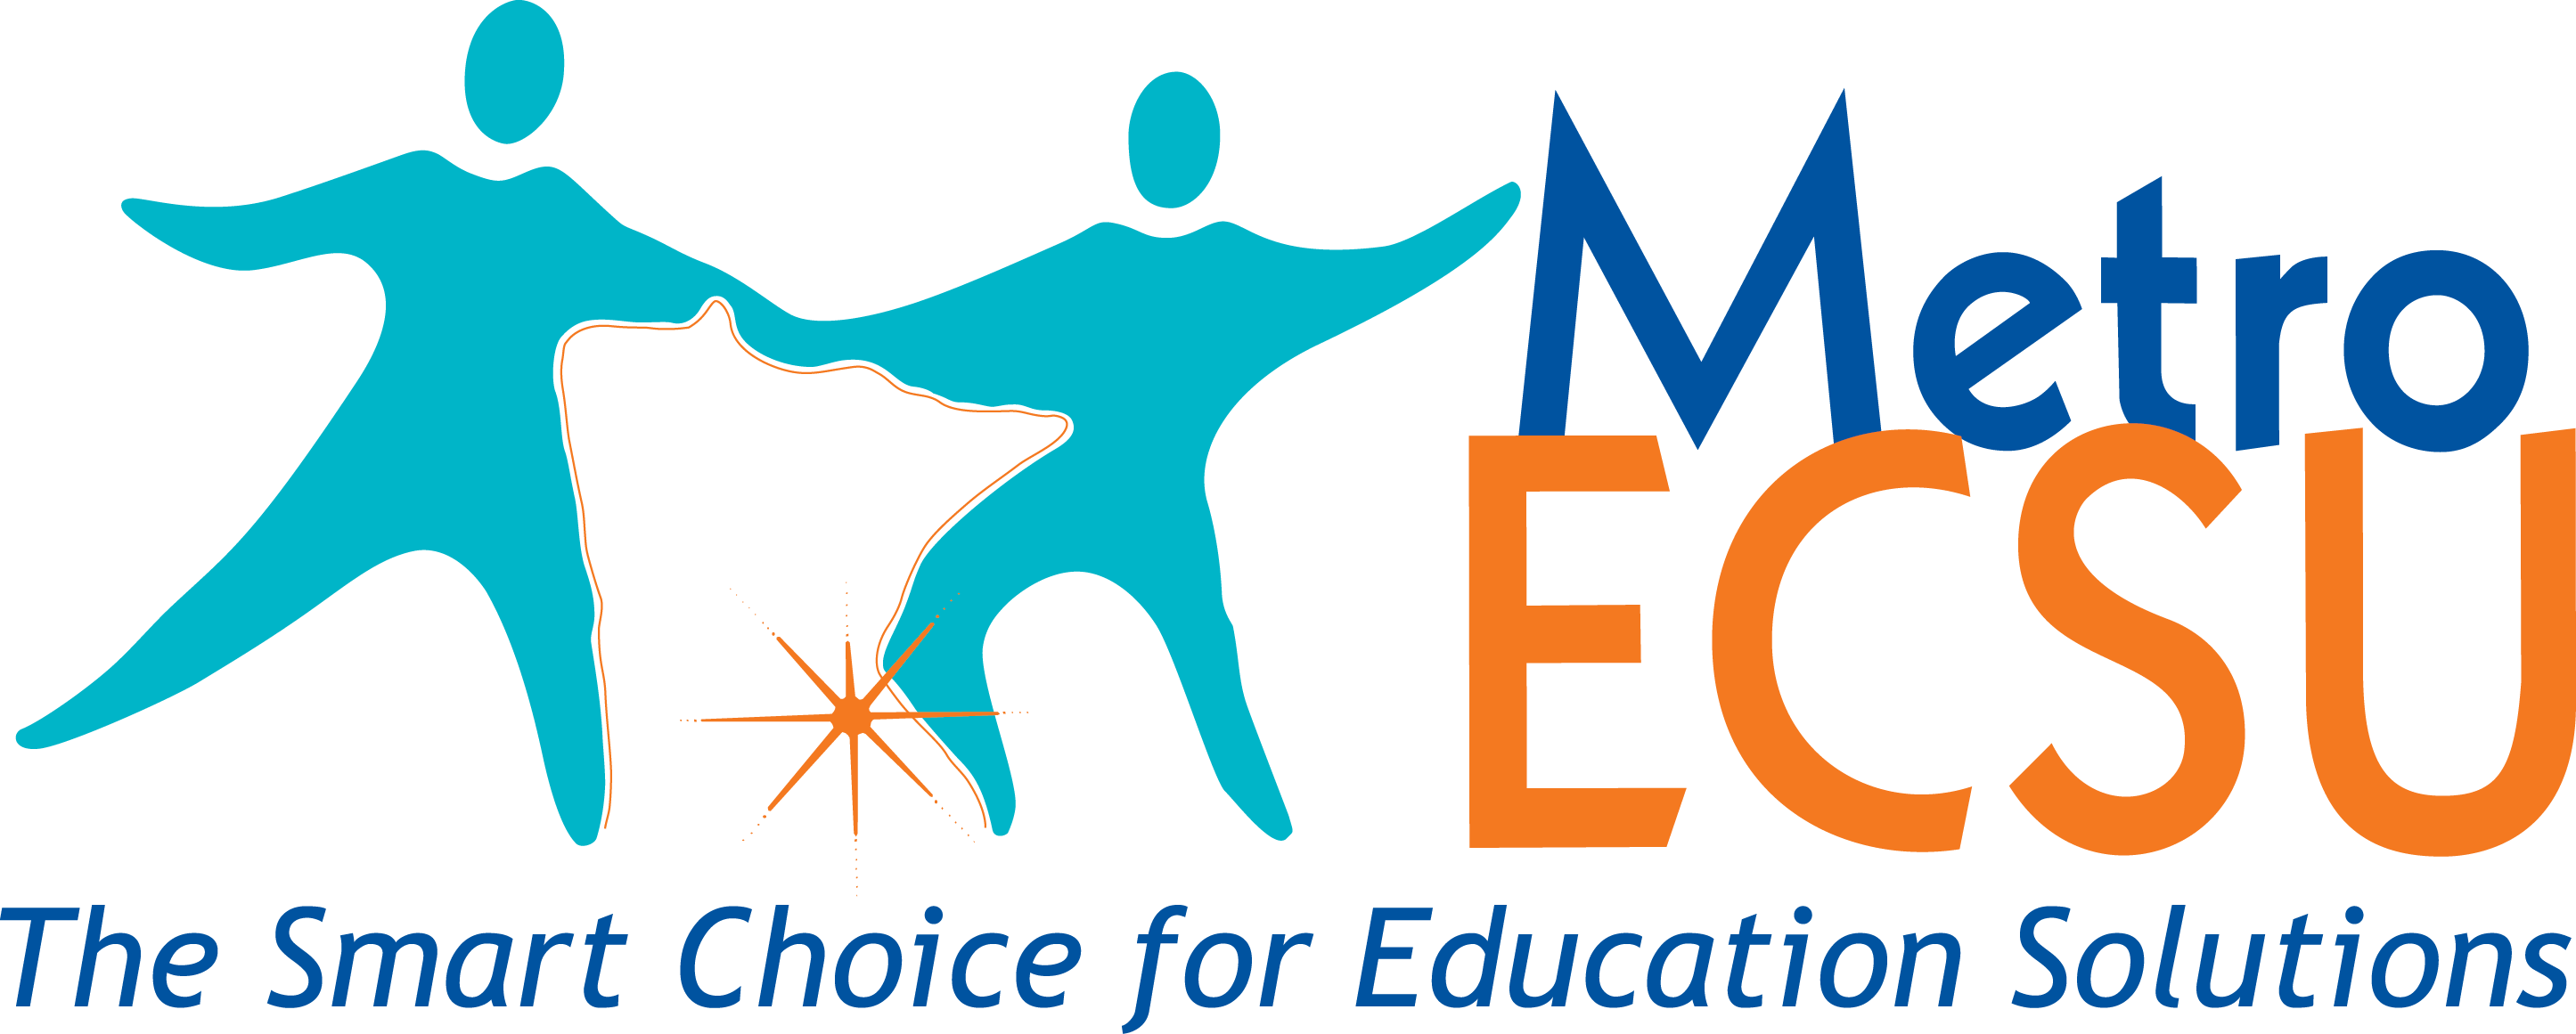 Metro ECSU - The Smart Choice for Education Solutions